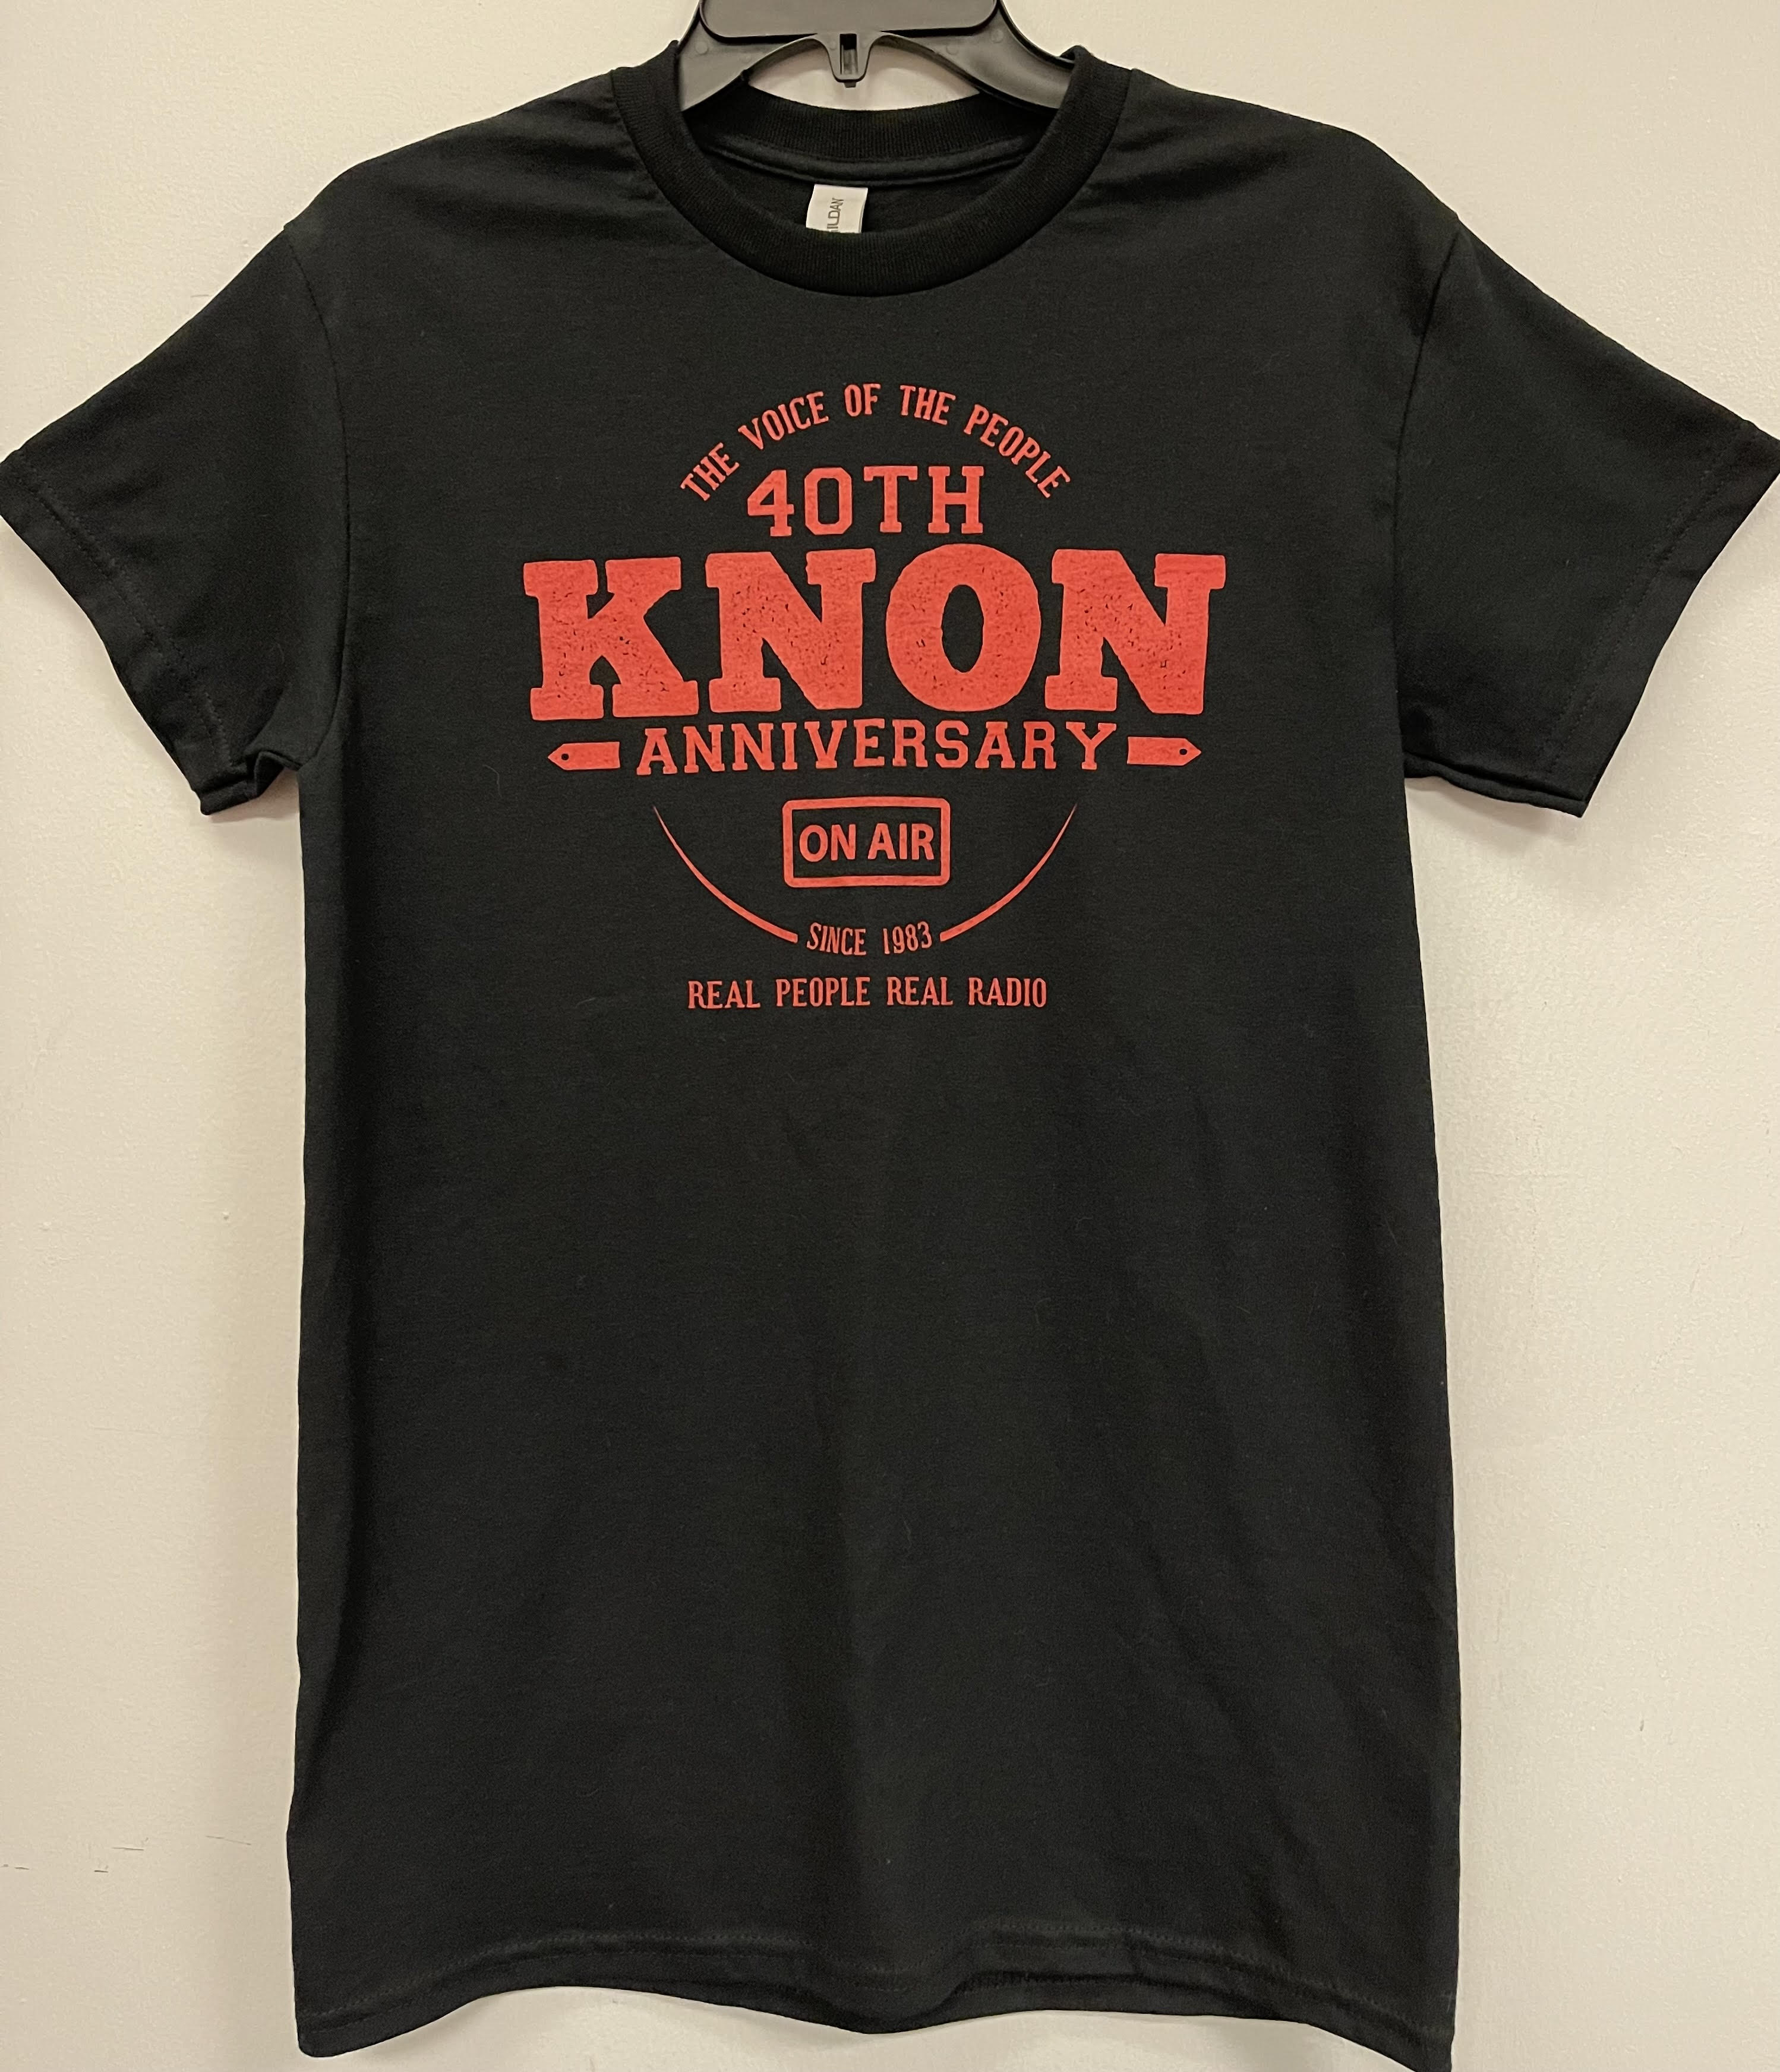 Support KNON